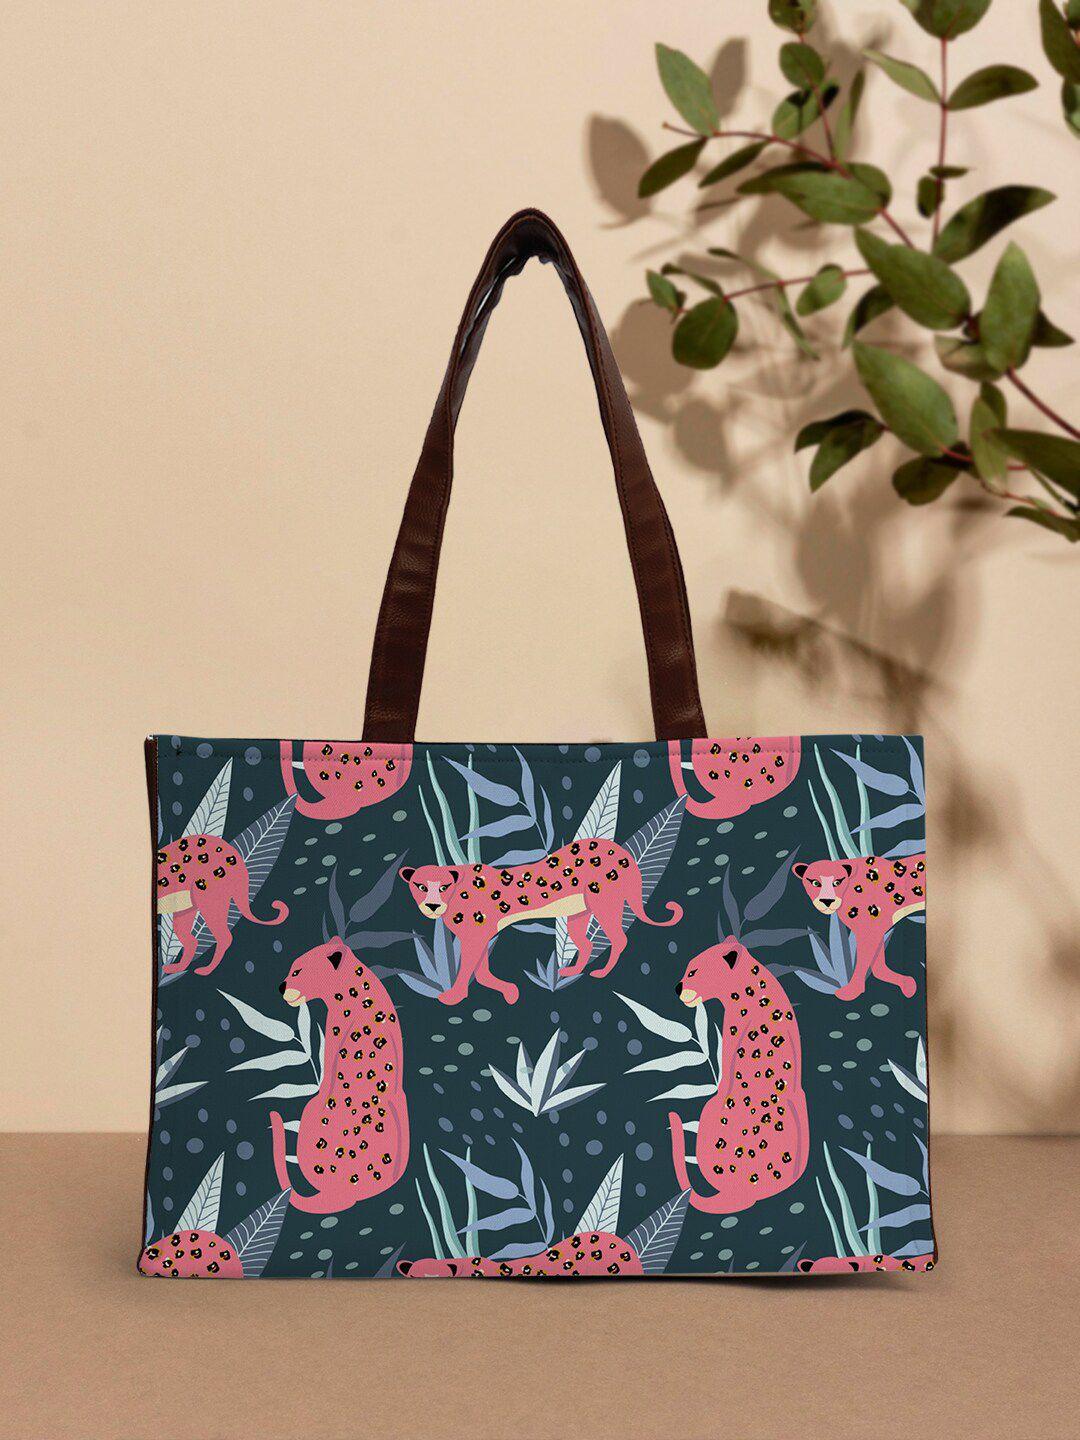 crazy corner multicoloured floral printed oversized structured tote bag with tasselled